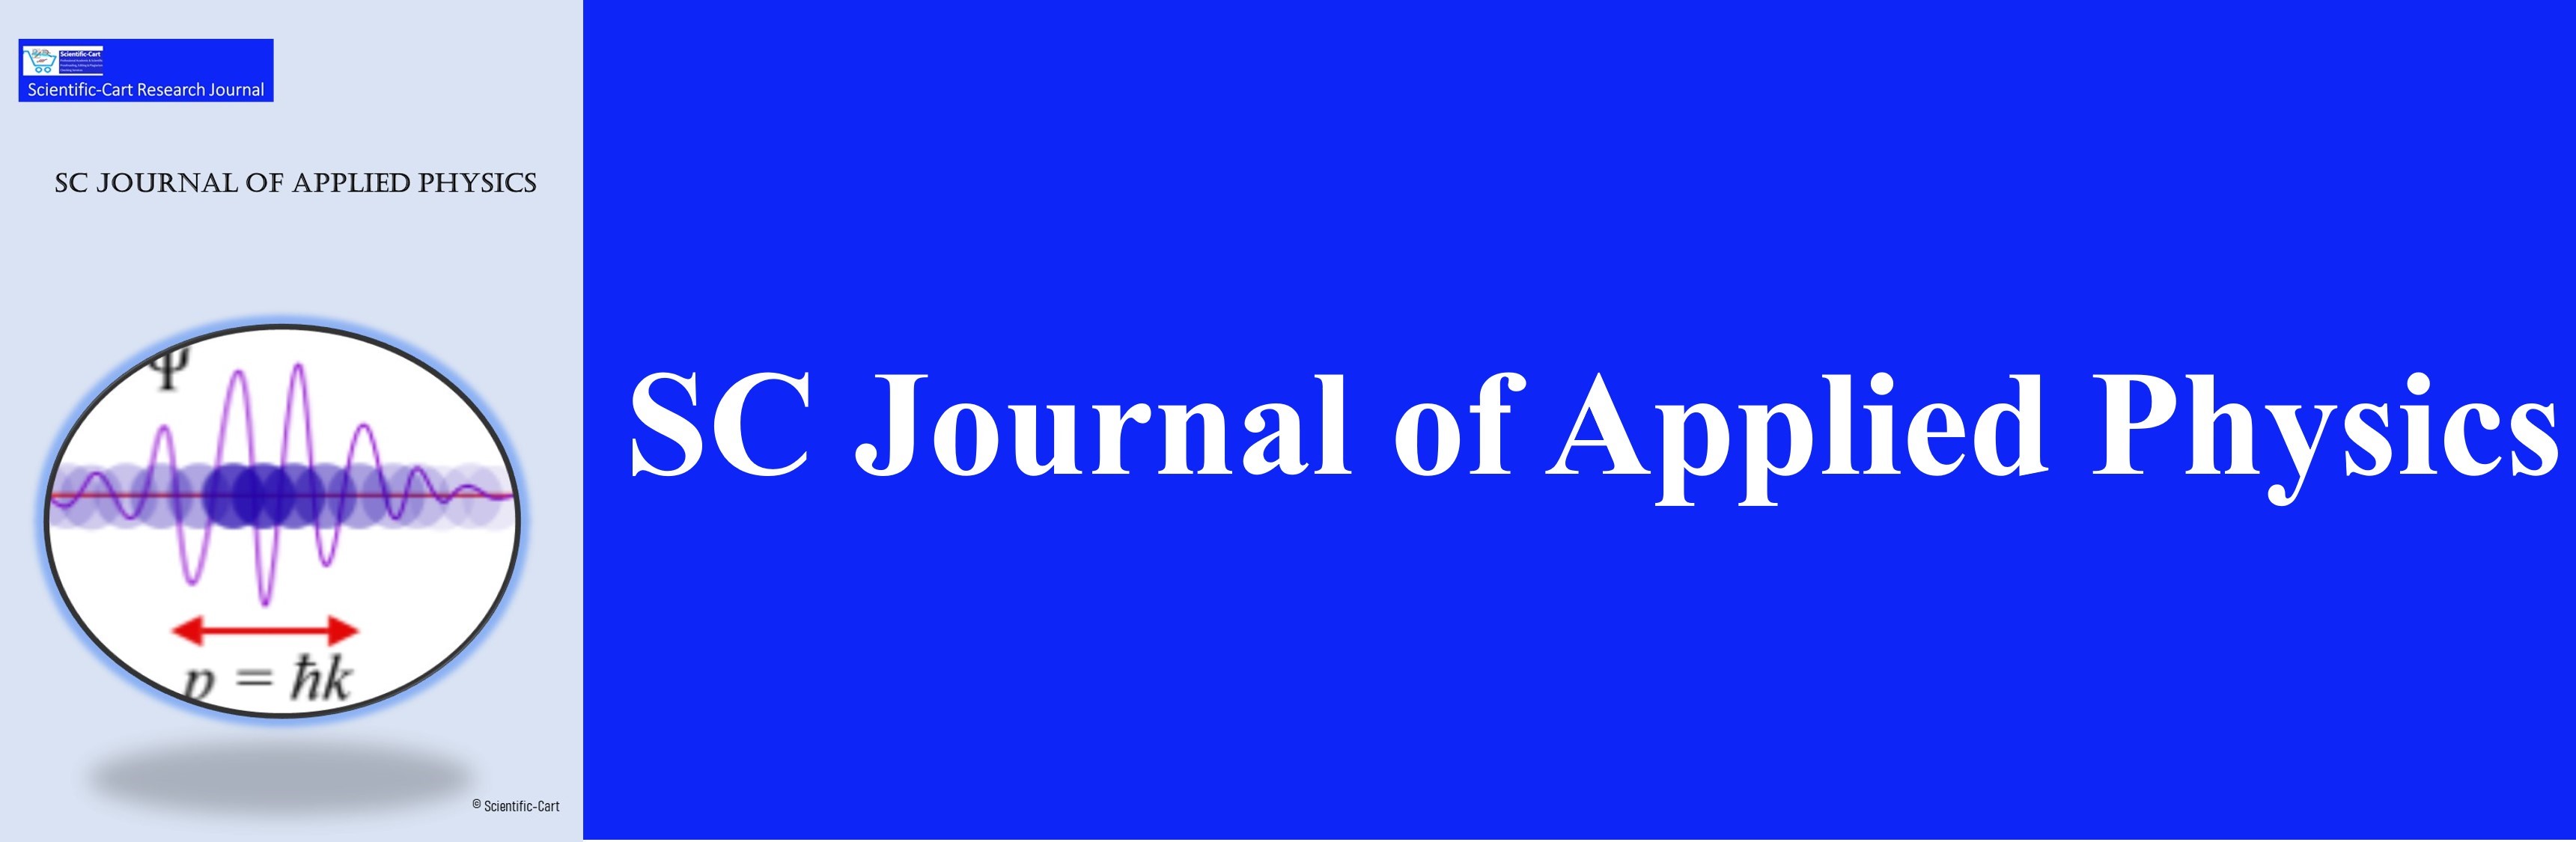 SC Journal of Applied Physics